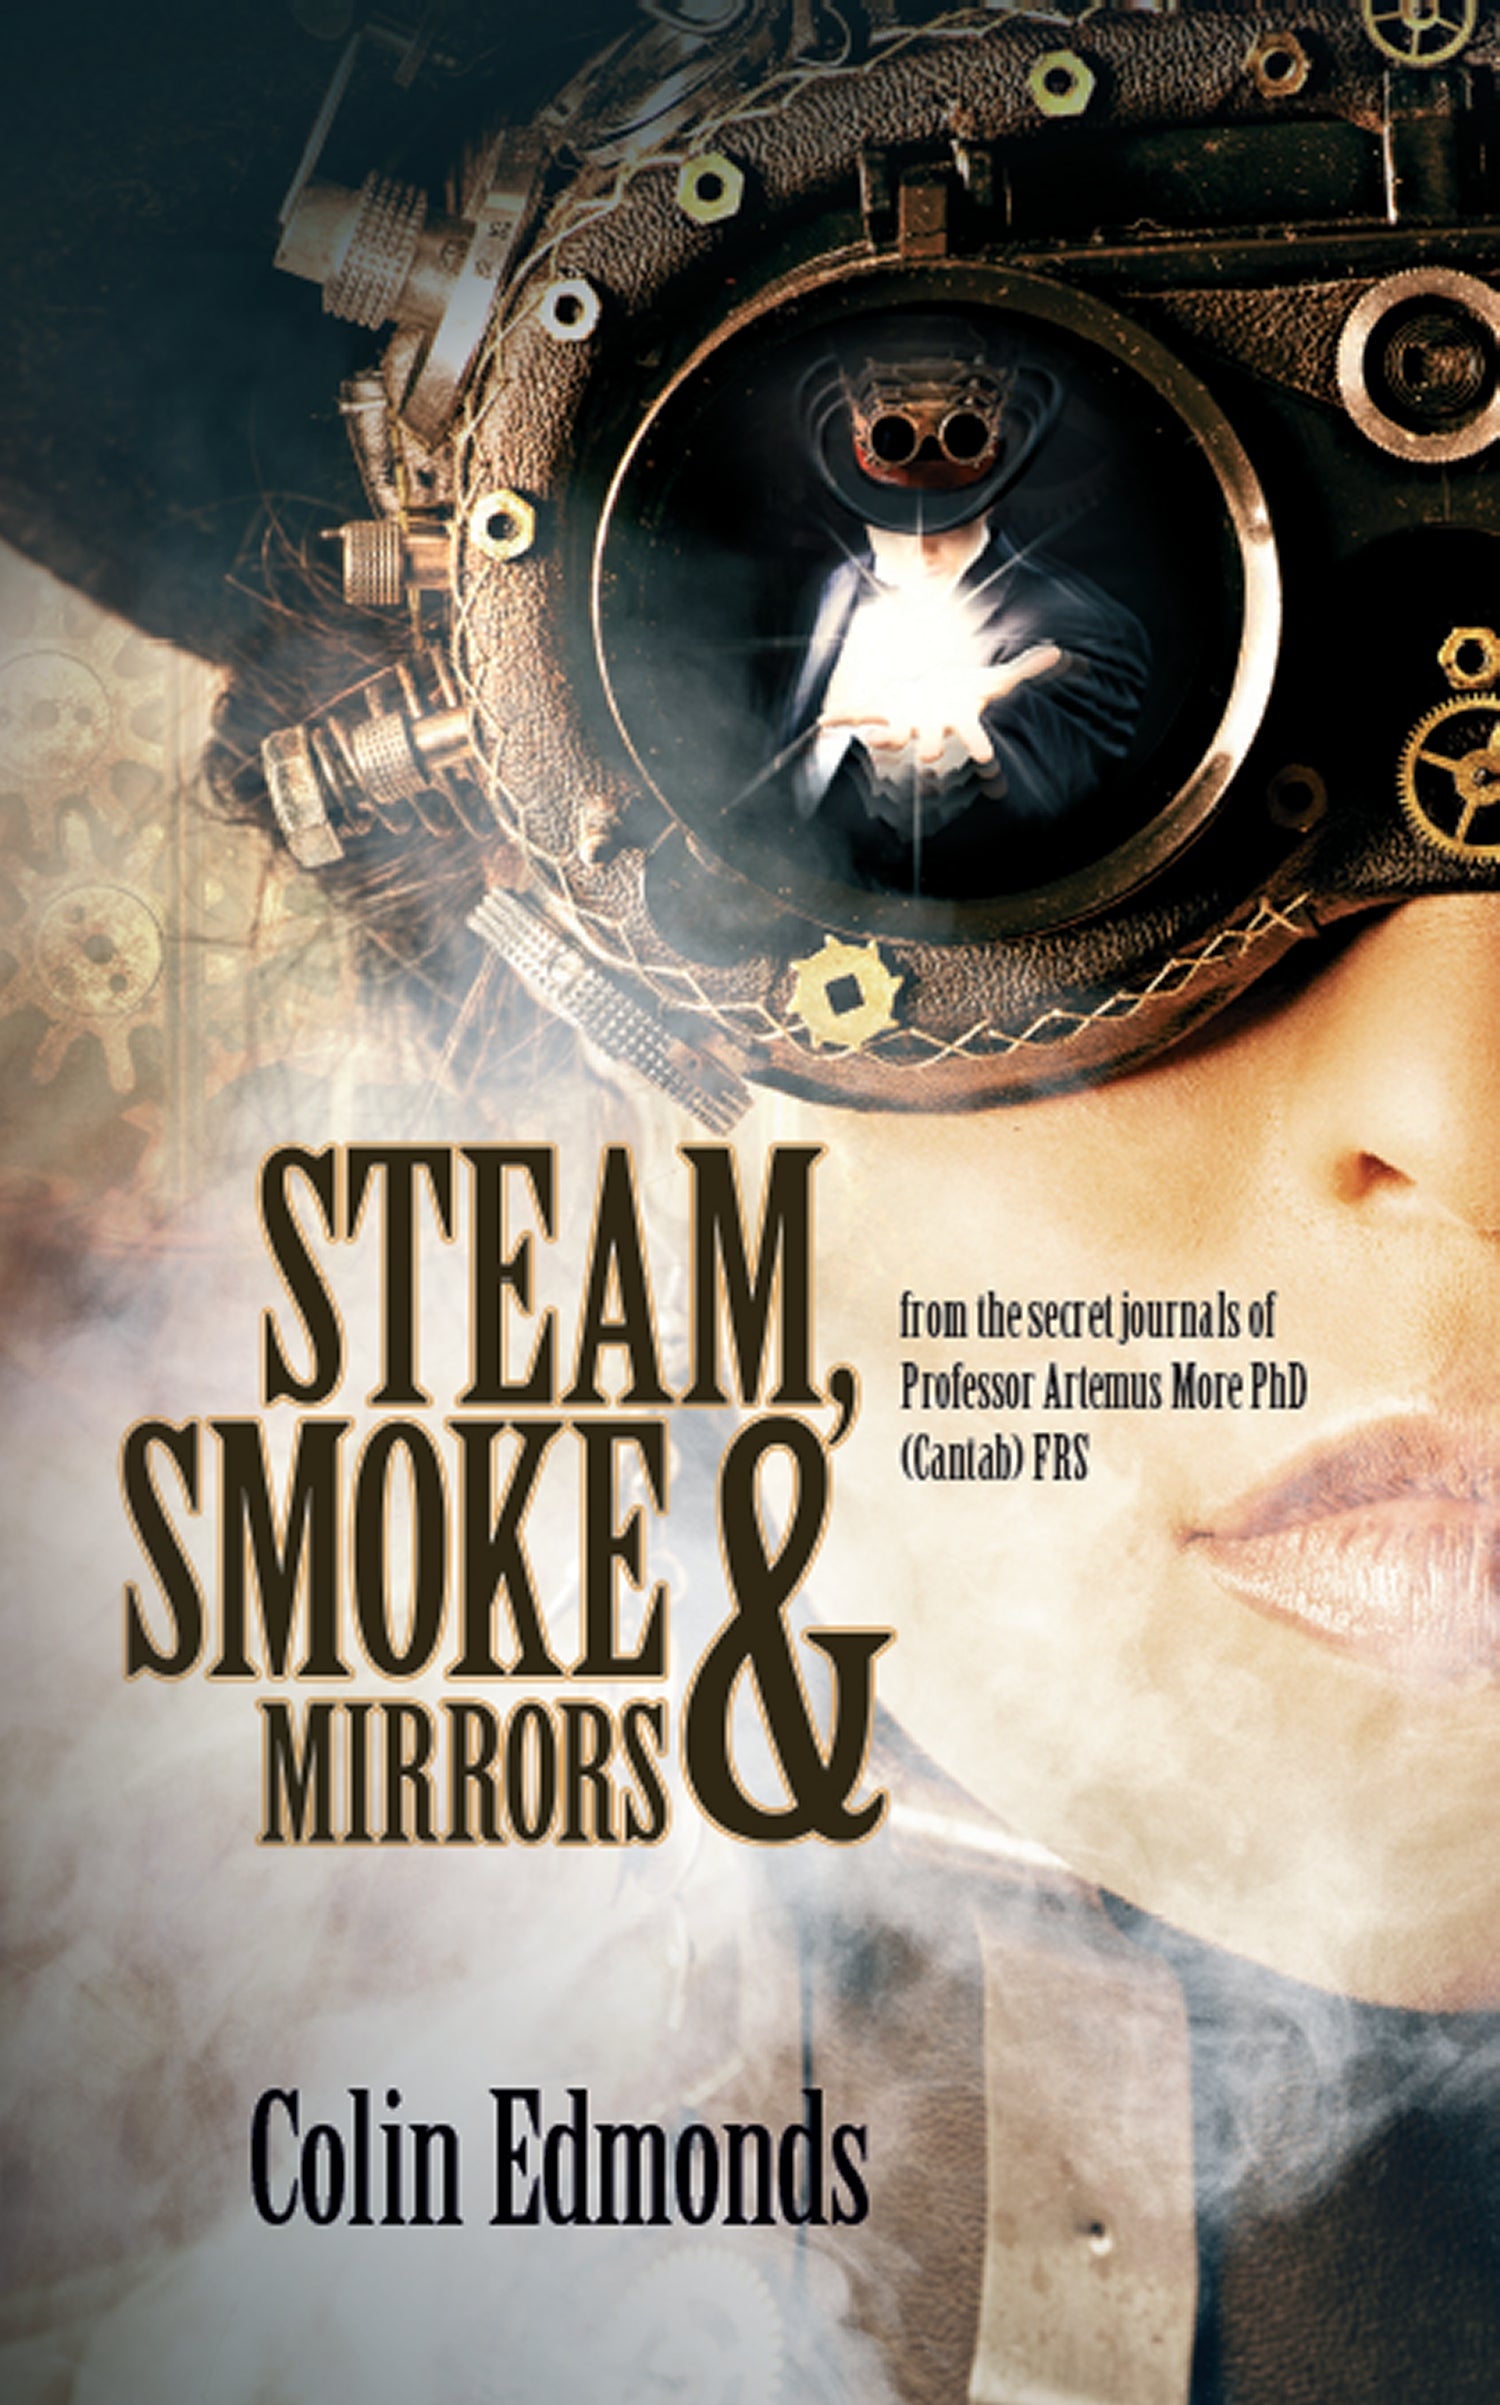 Steam Smoke and Mirrors by Colin Edmonds